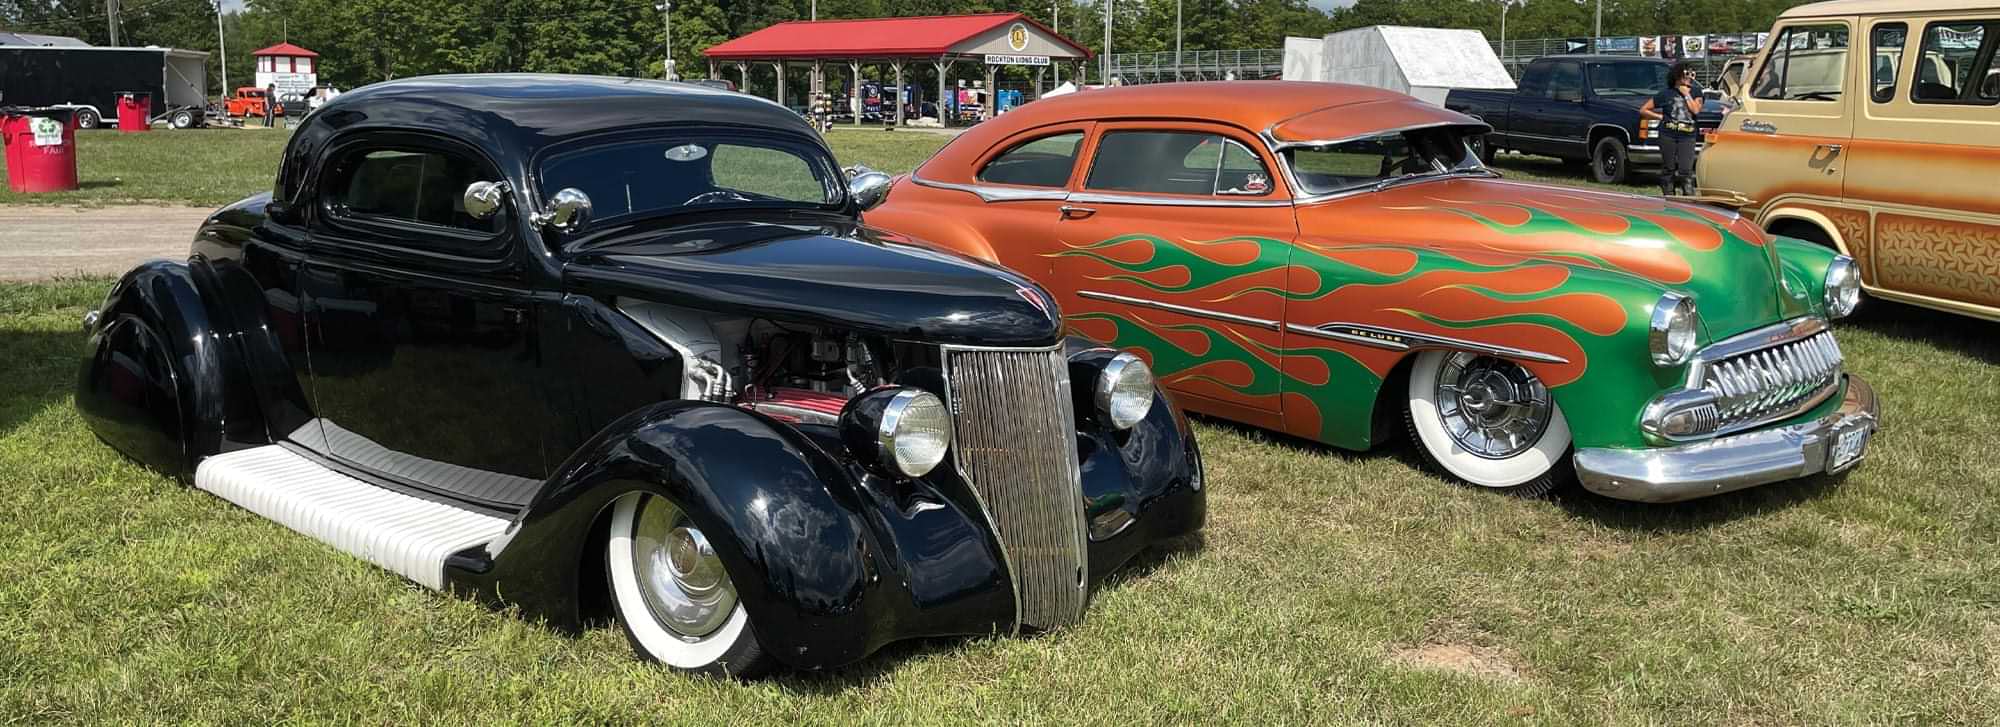 two cars, a black classic coupe and a classic chevy DeLuxe with orange and green flame paint, parked at the Jalopy Jam Up